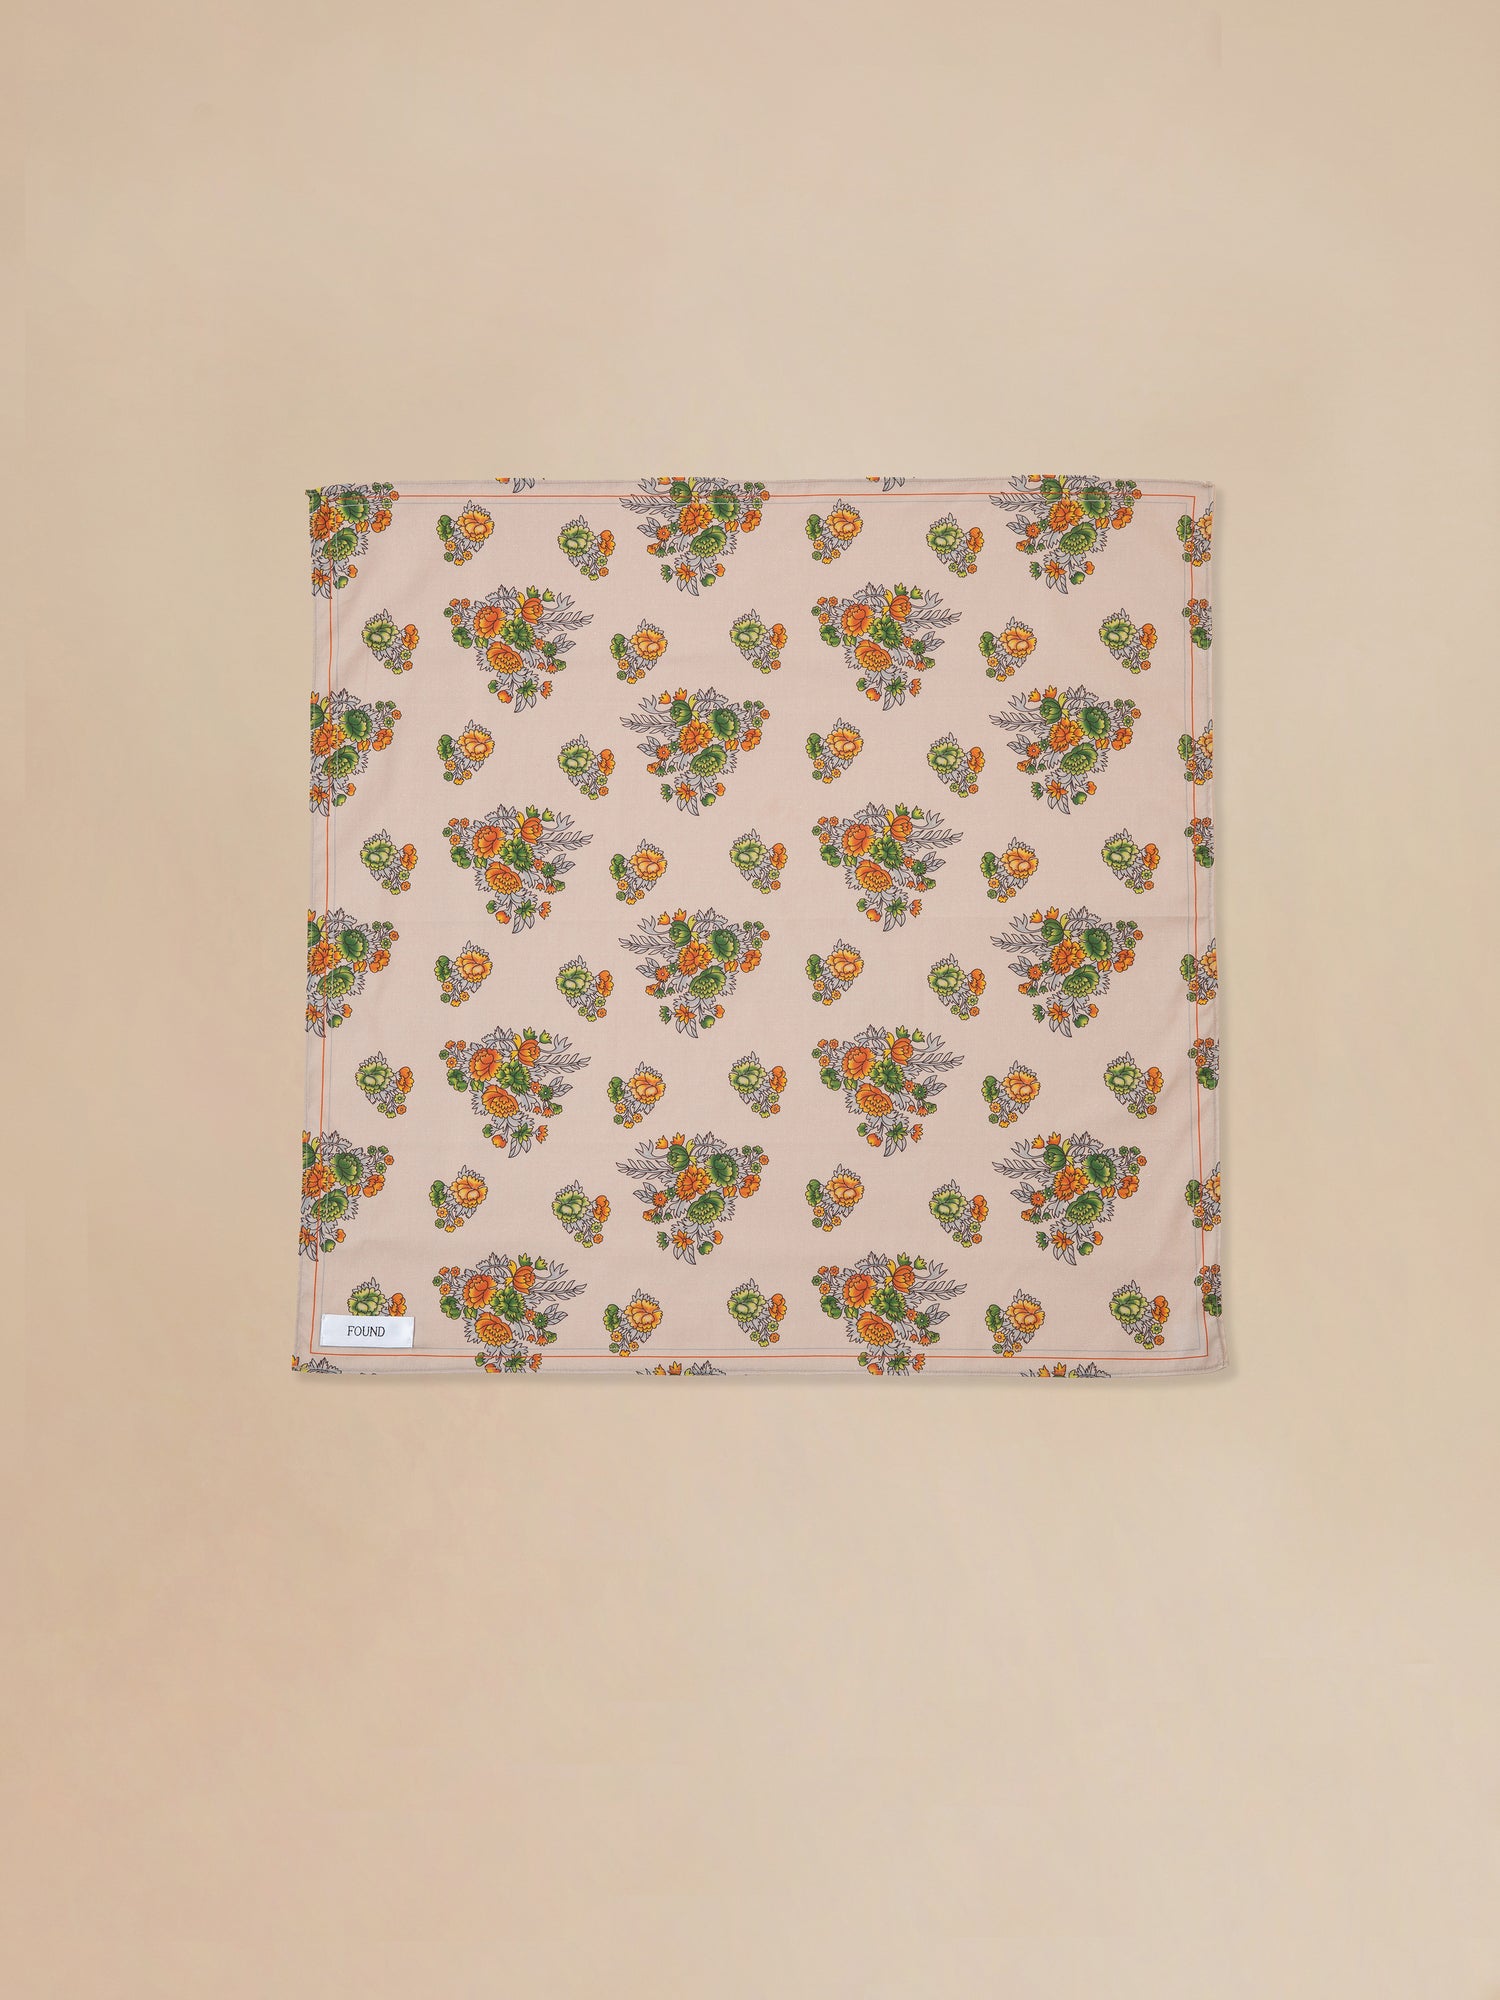 A Found floral print bandana with pink, orange, and green motifs inspired by nature.